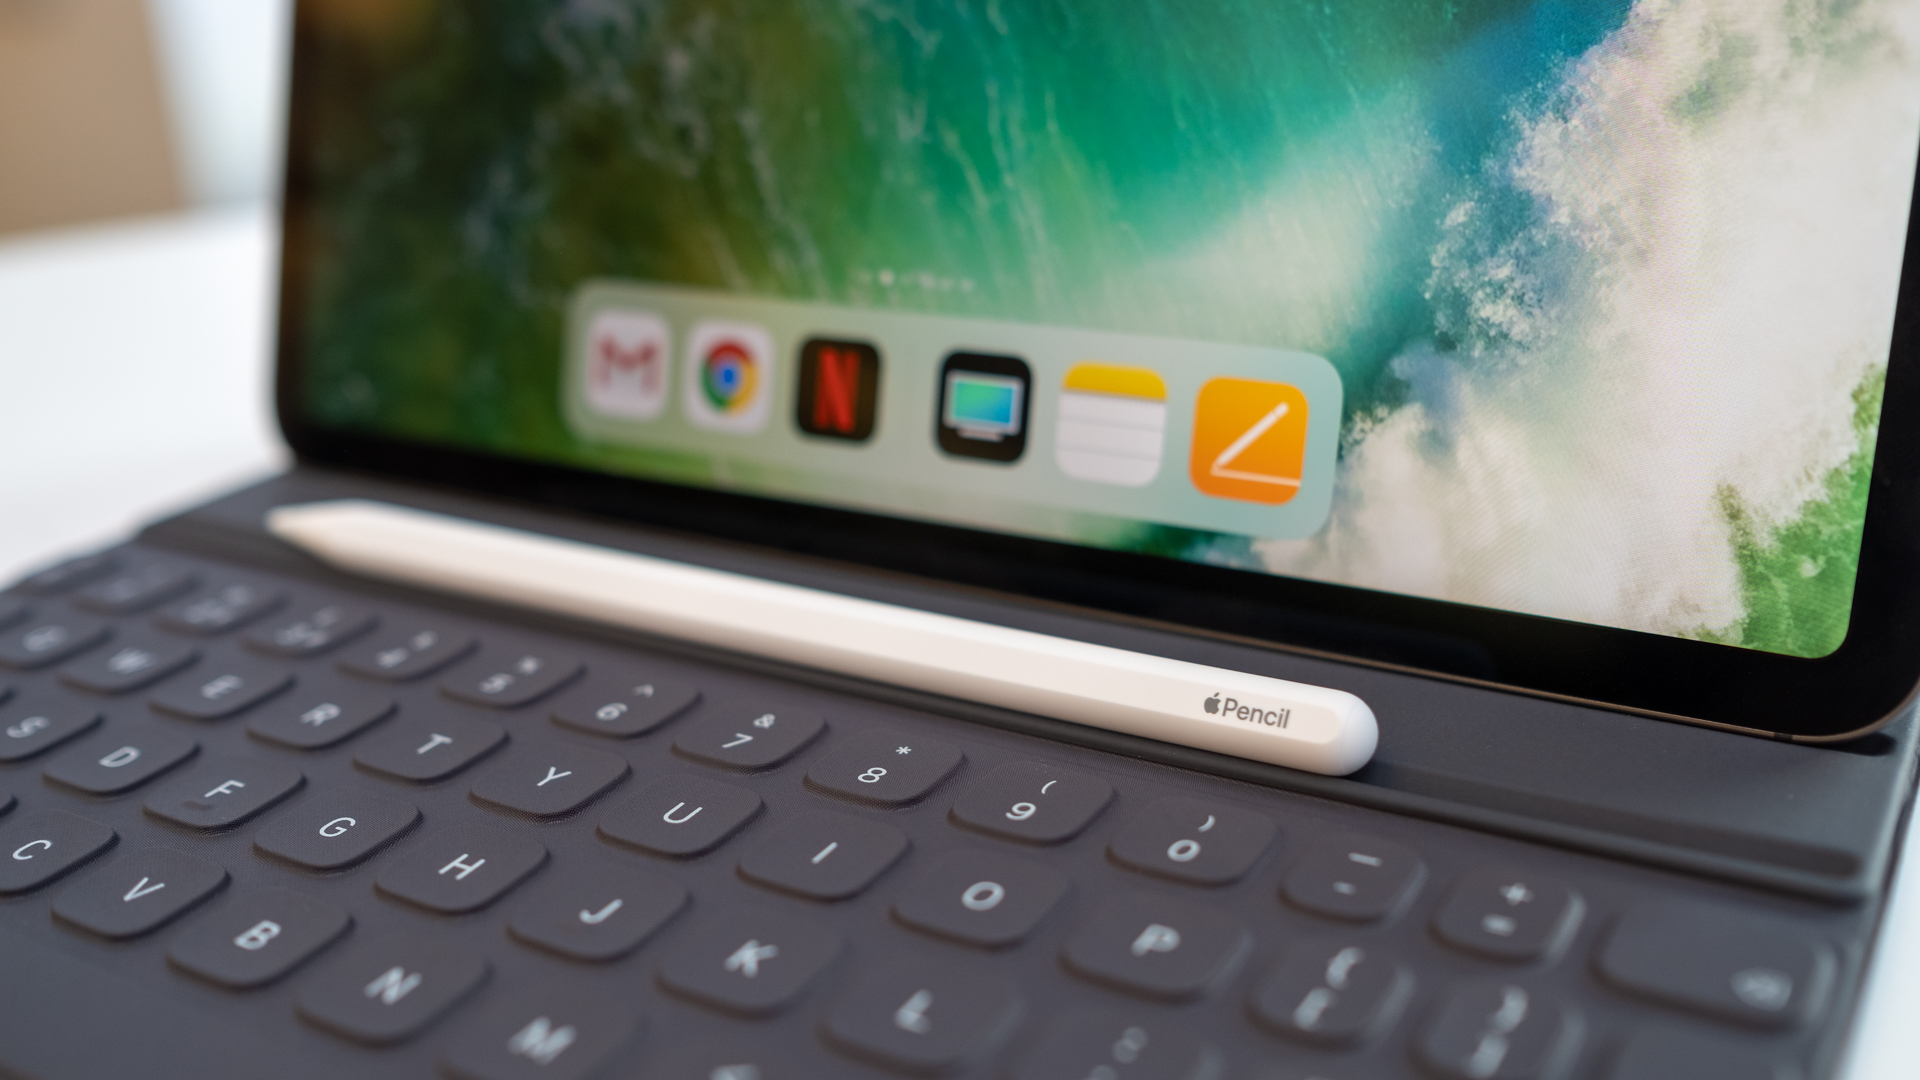 Apple Pencil on iPad: our full guide on how to use it | TechRadar